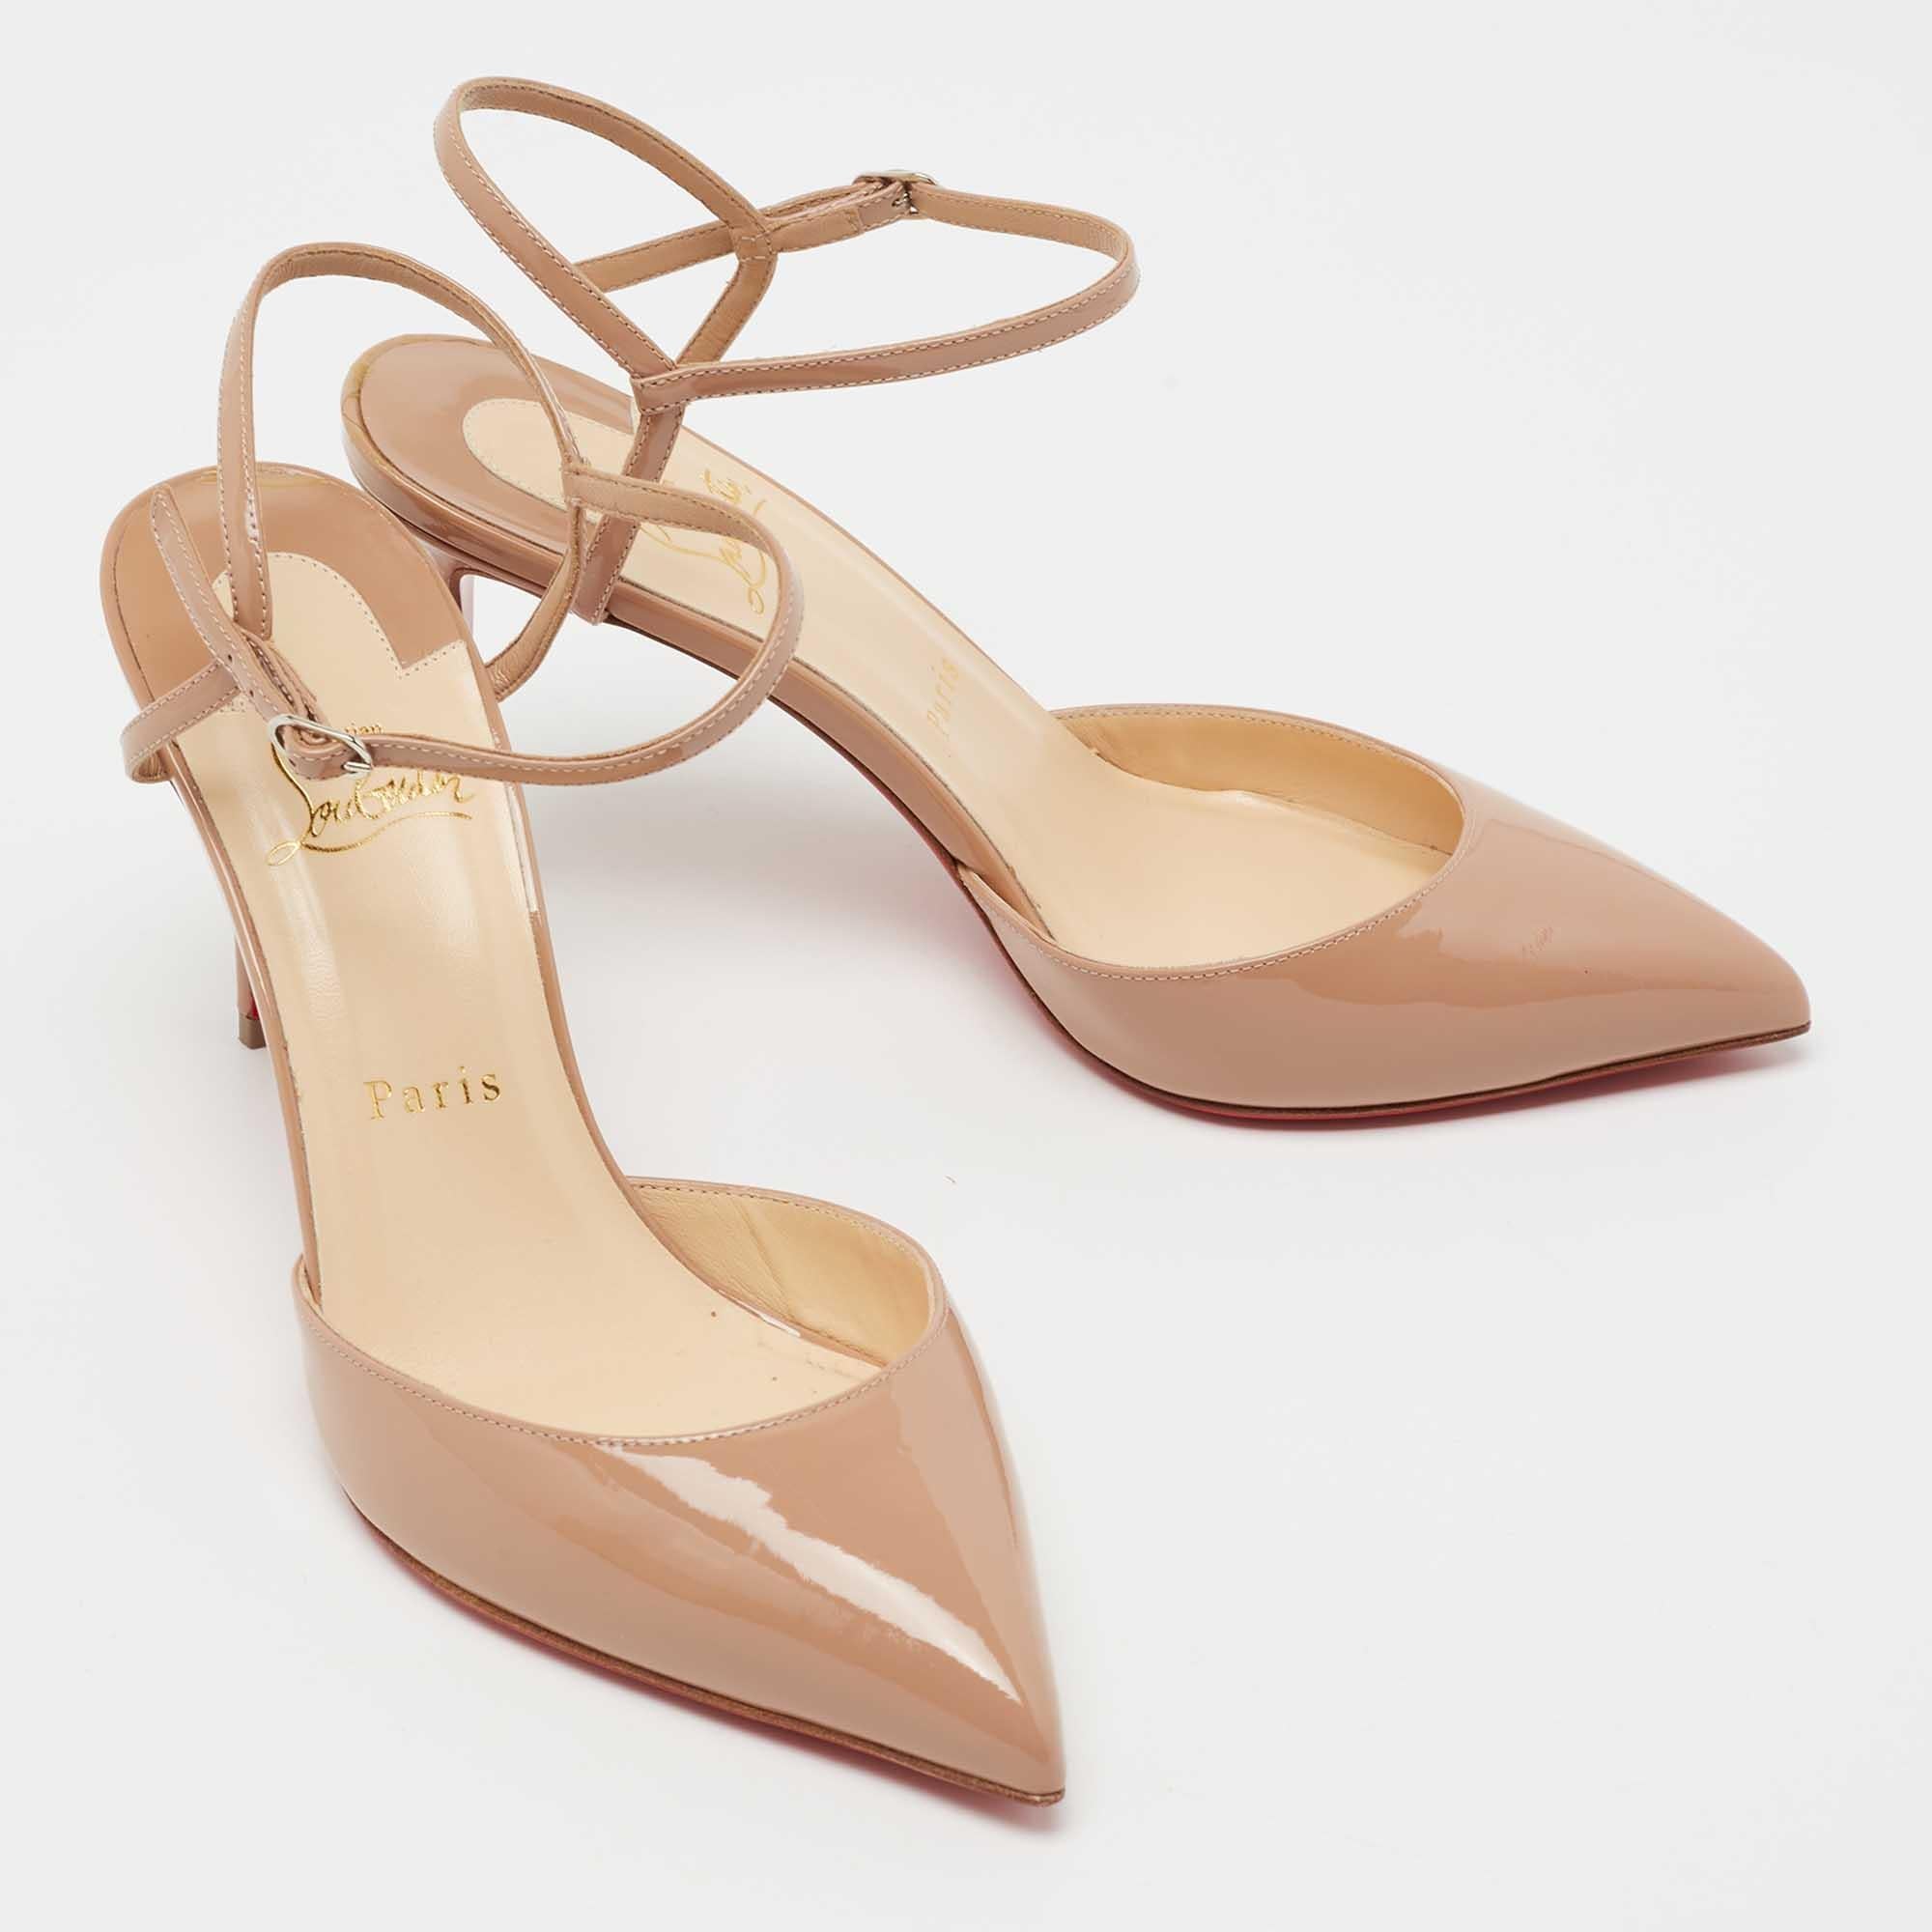 Christian Louboutin Beige Patent Leather Rivierina Ankle-Strap Pumps Size 38.5 1